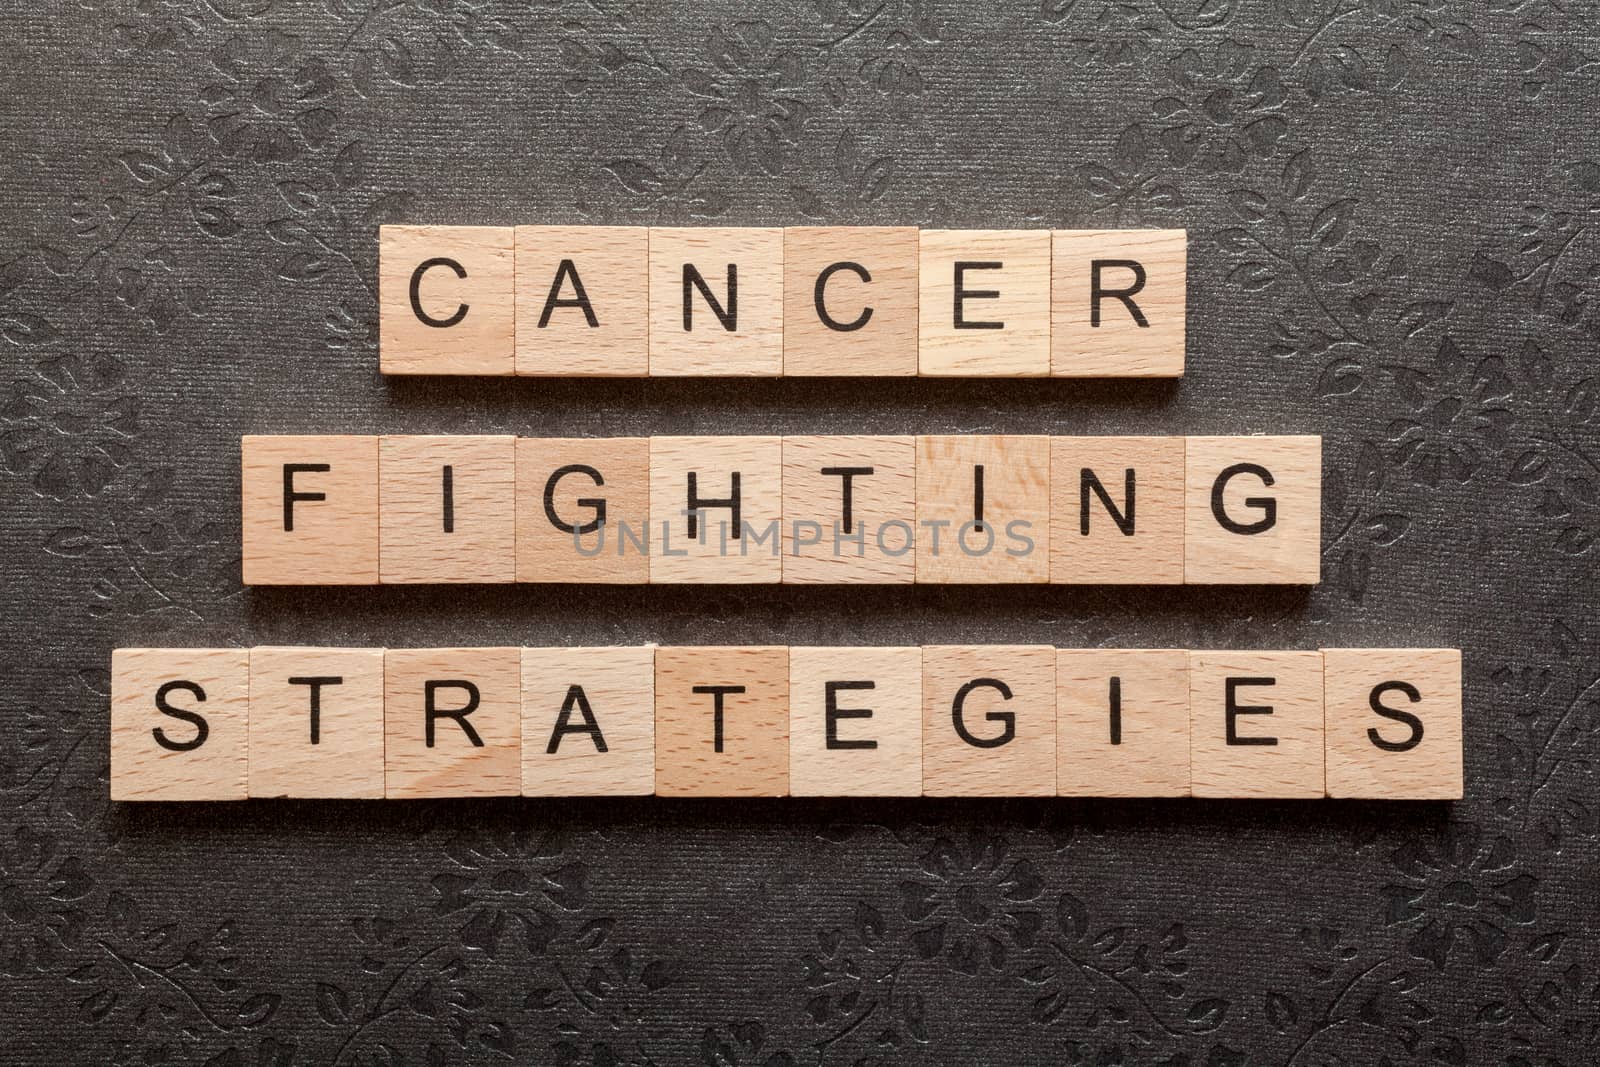 Cancer fighting strategies concept by Portokalis